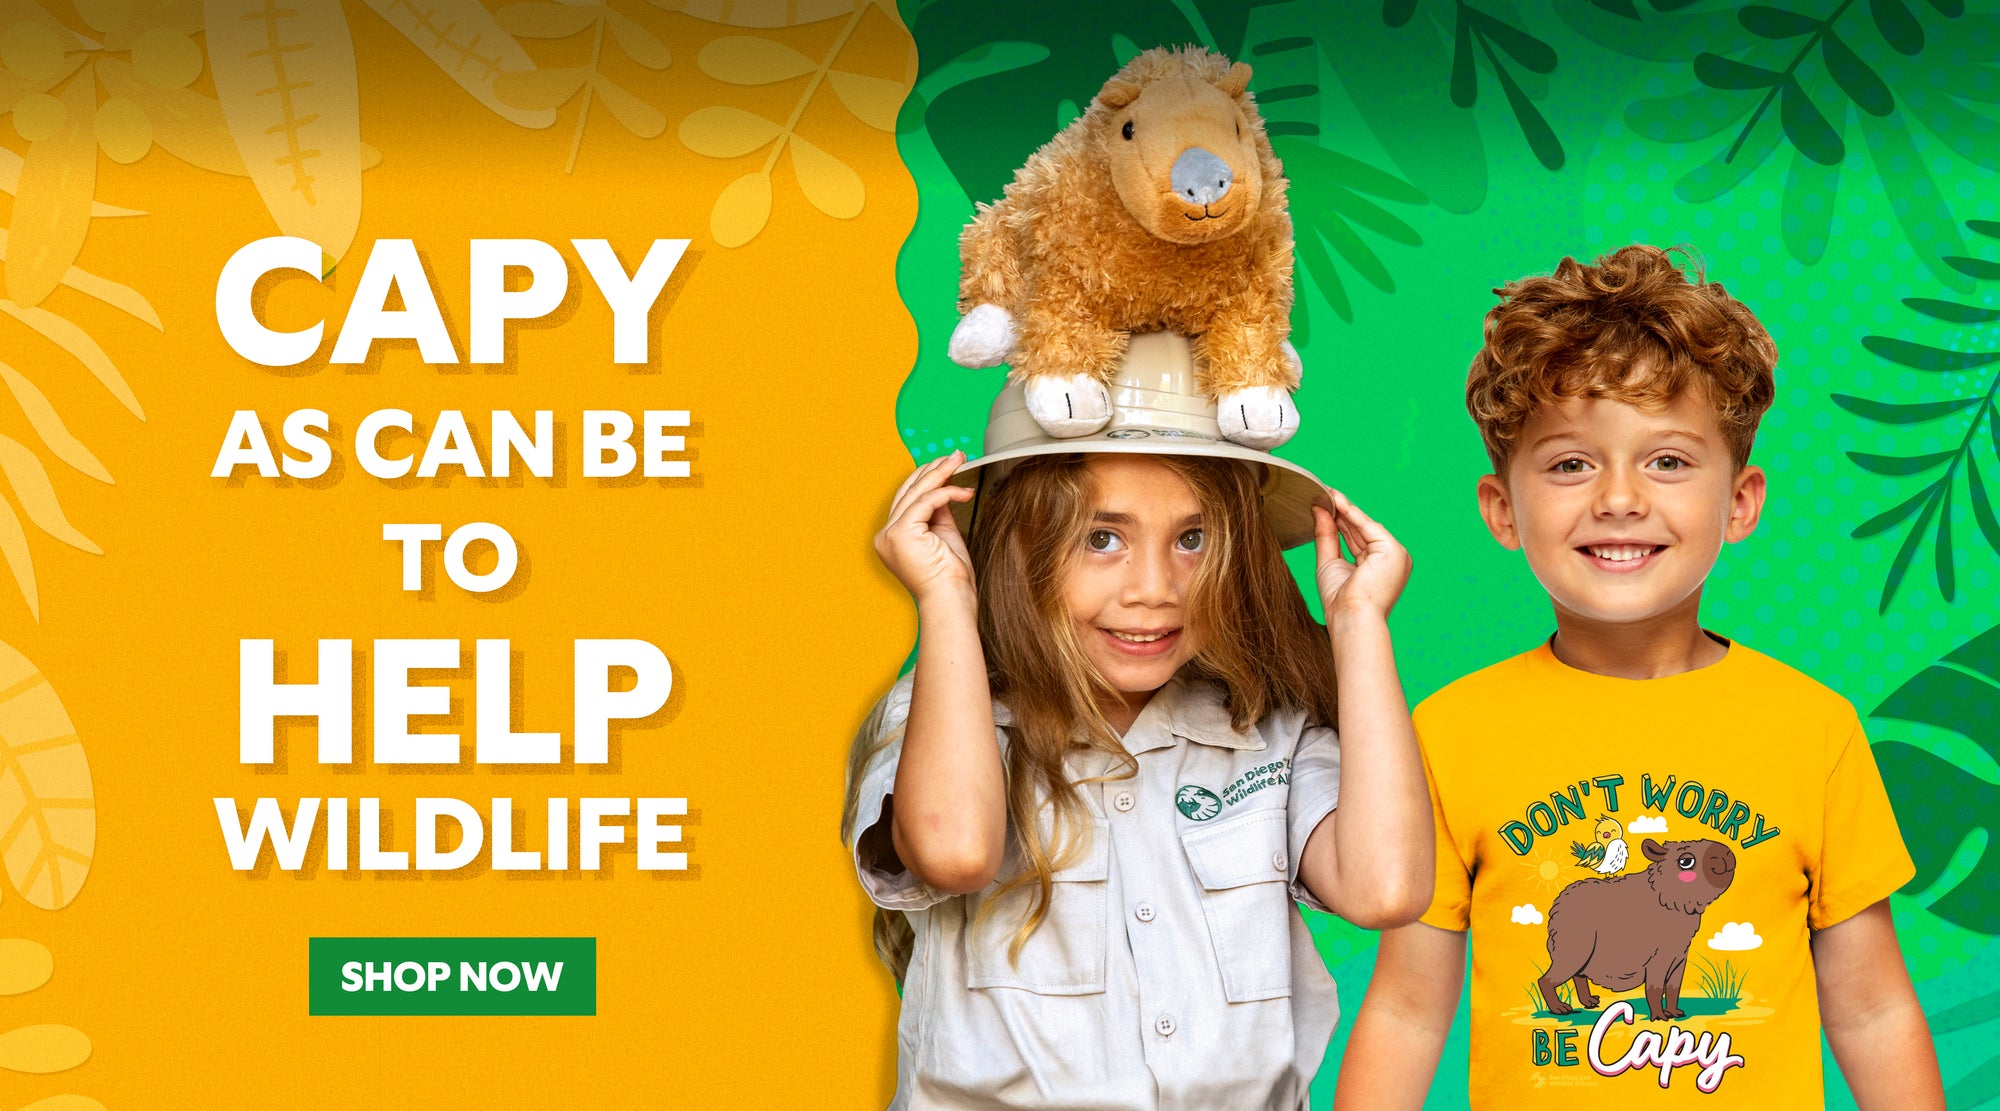 Support Wildlife Conservation with our Capybara Merchandise Collection